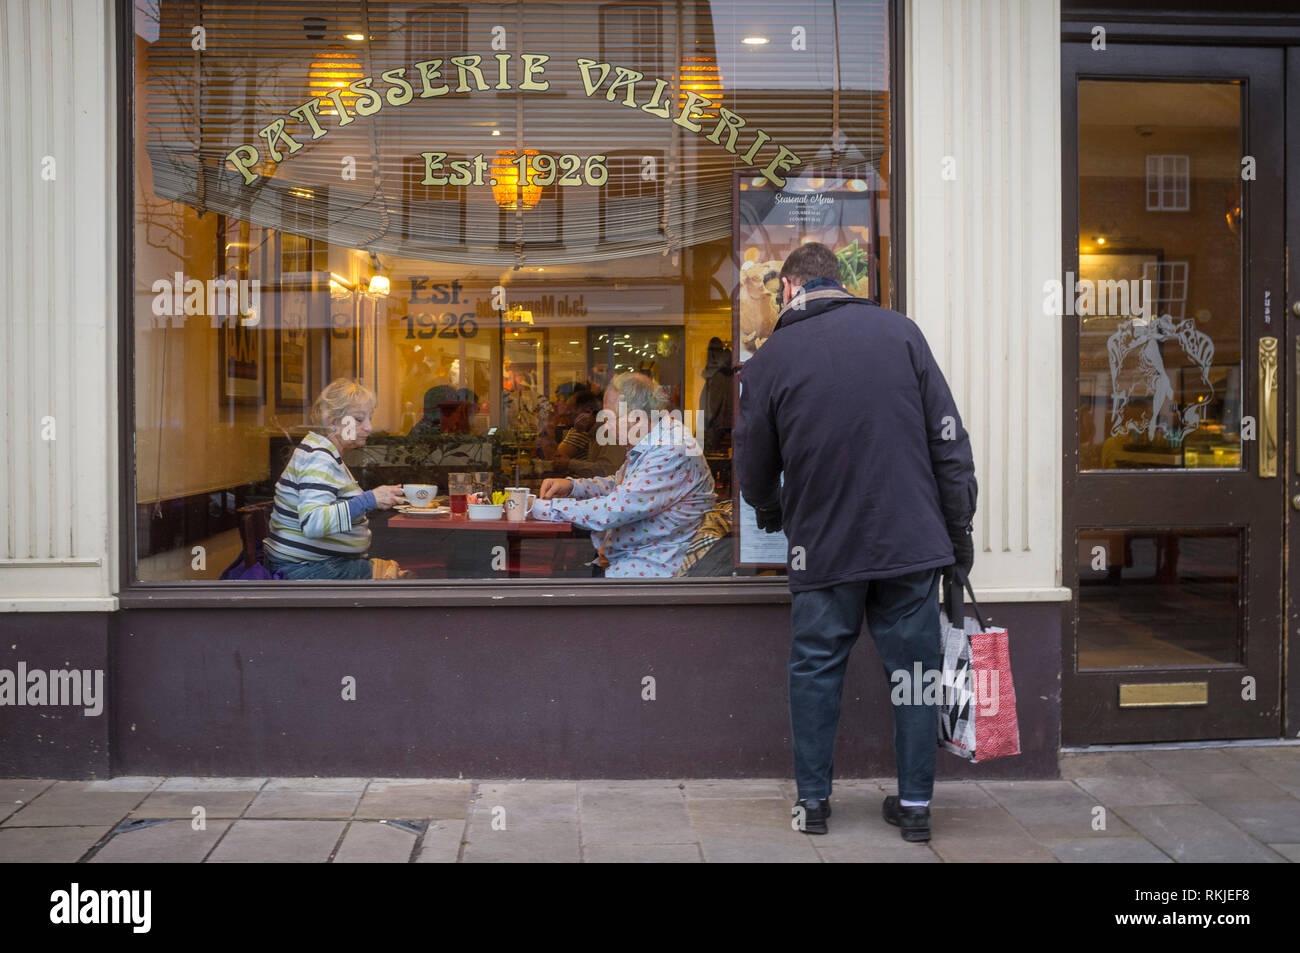 The Patisserie Valerie coffee and cake shop in Henley-on-Thames, Oxfordshire. Stock Photo